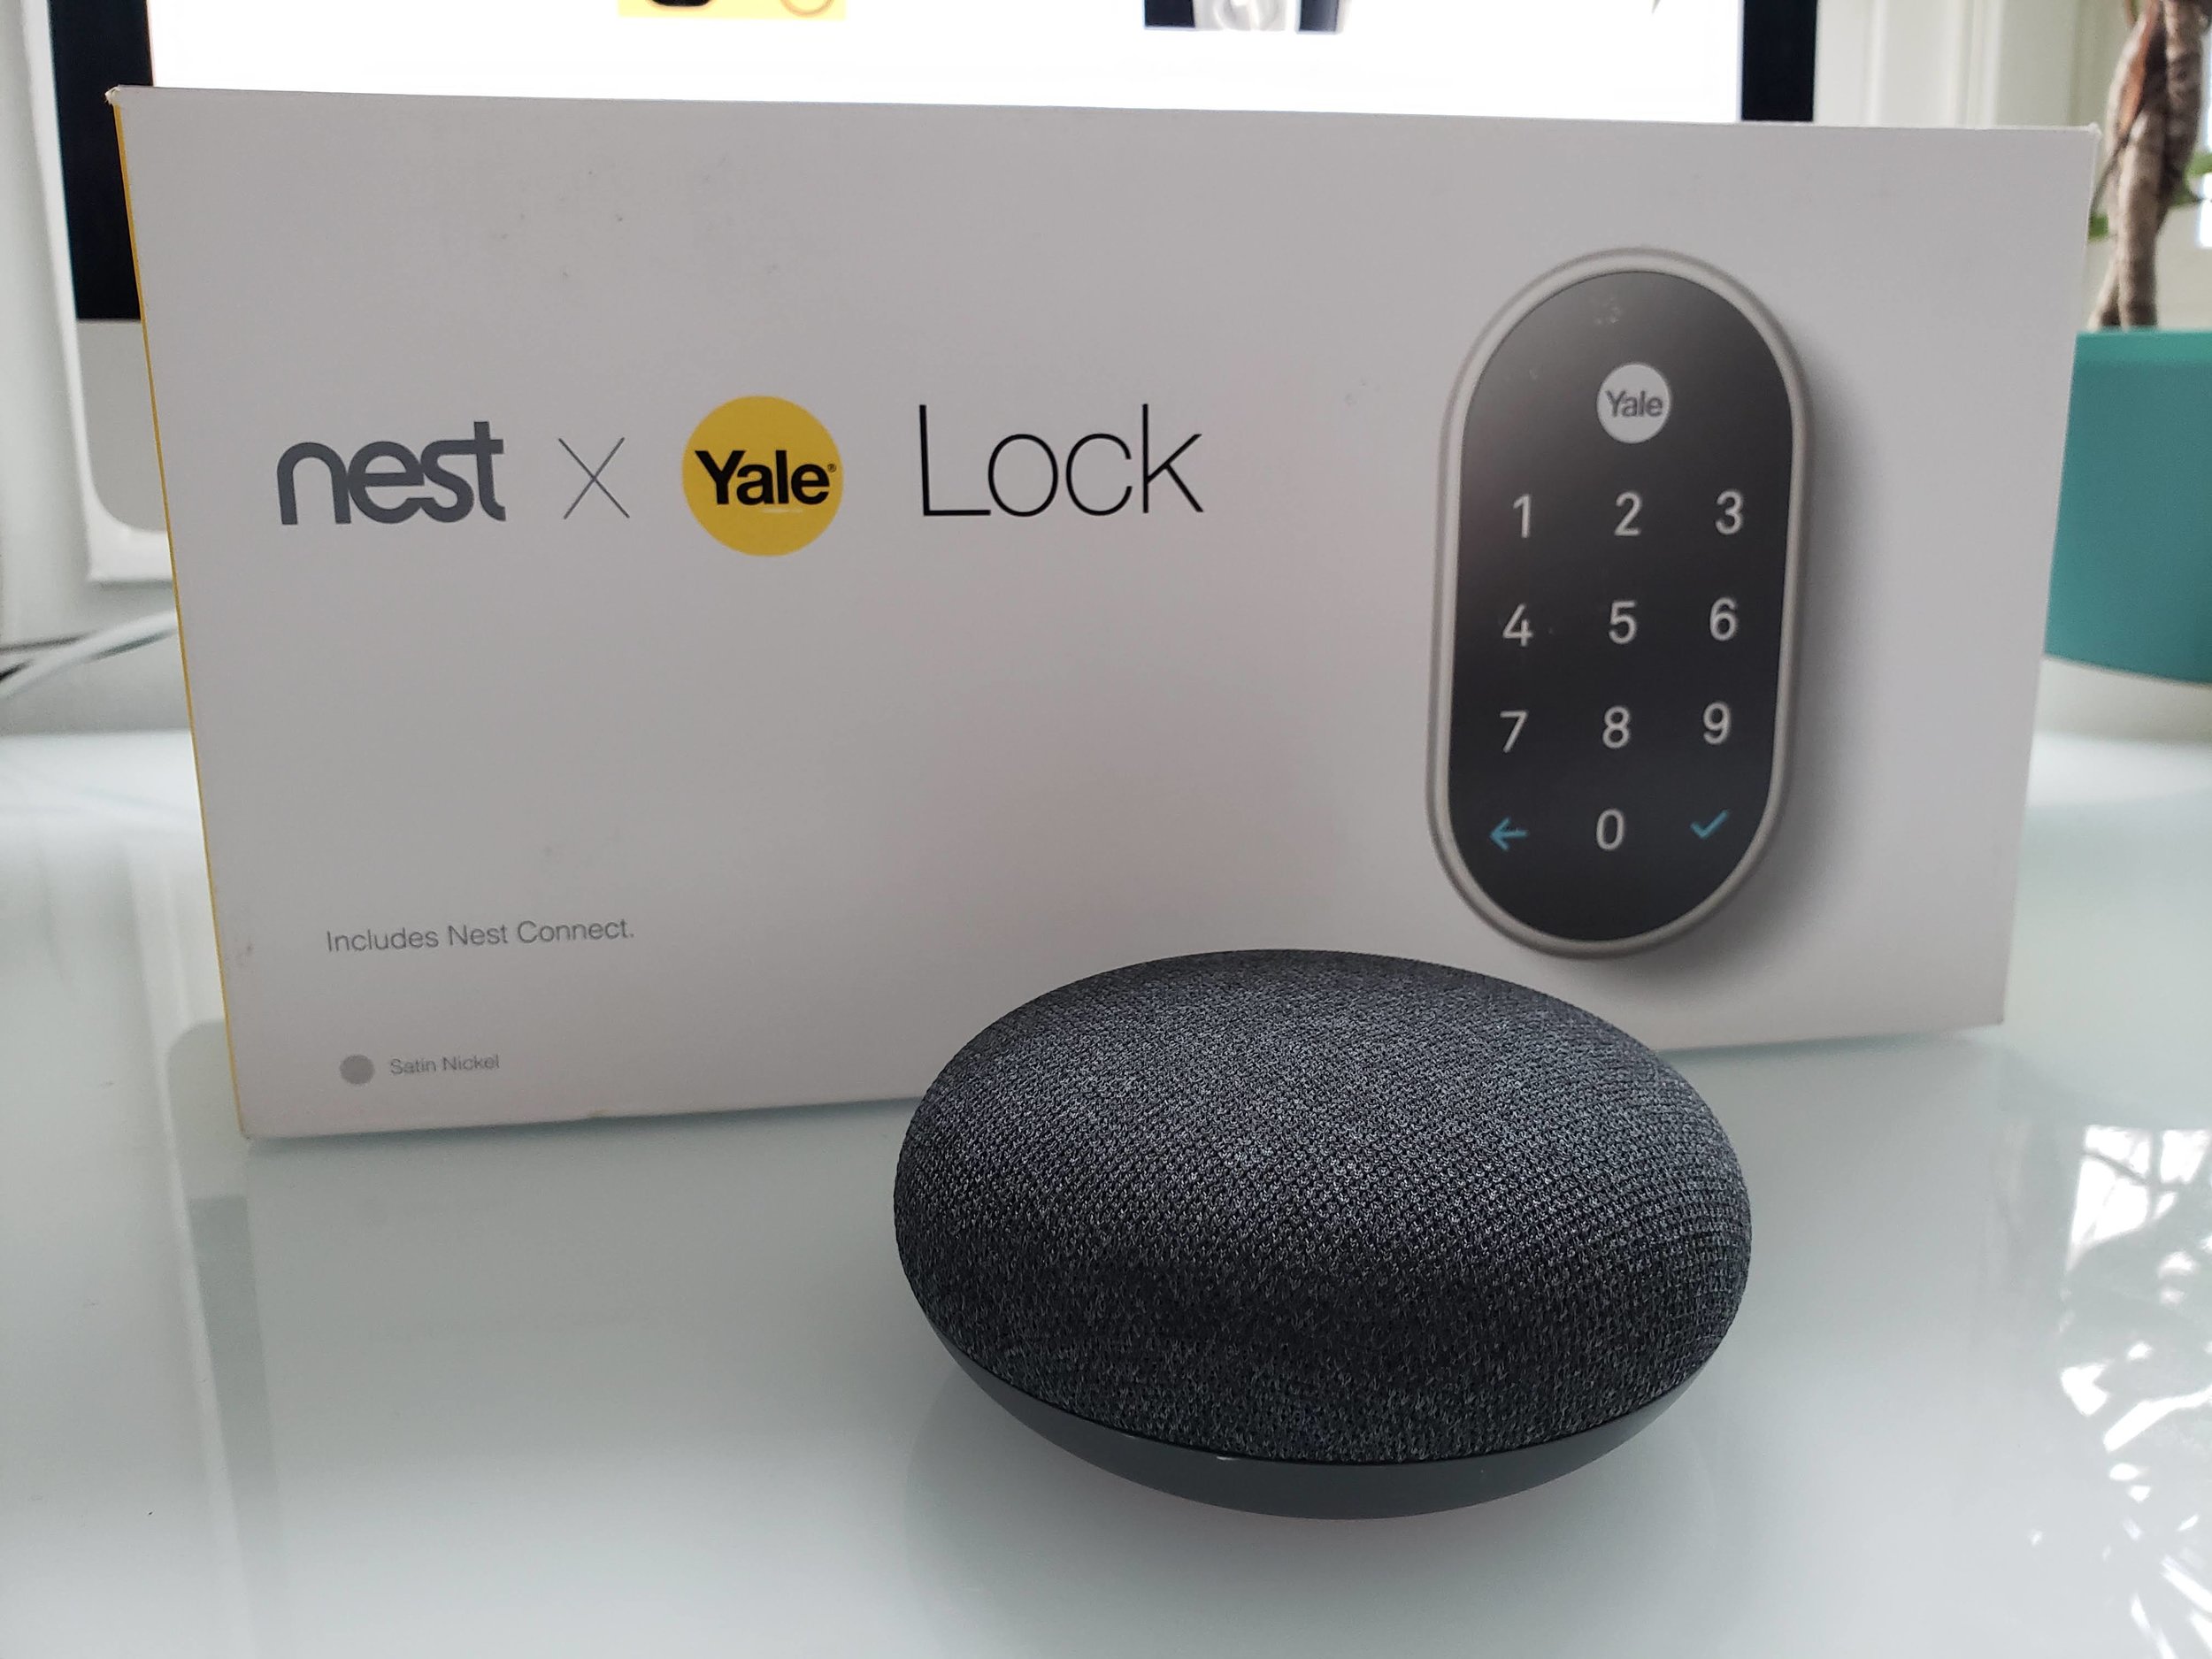 Does Yale Smart Lock Work With Google Home?